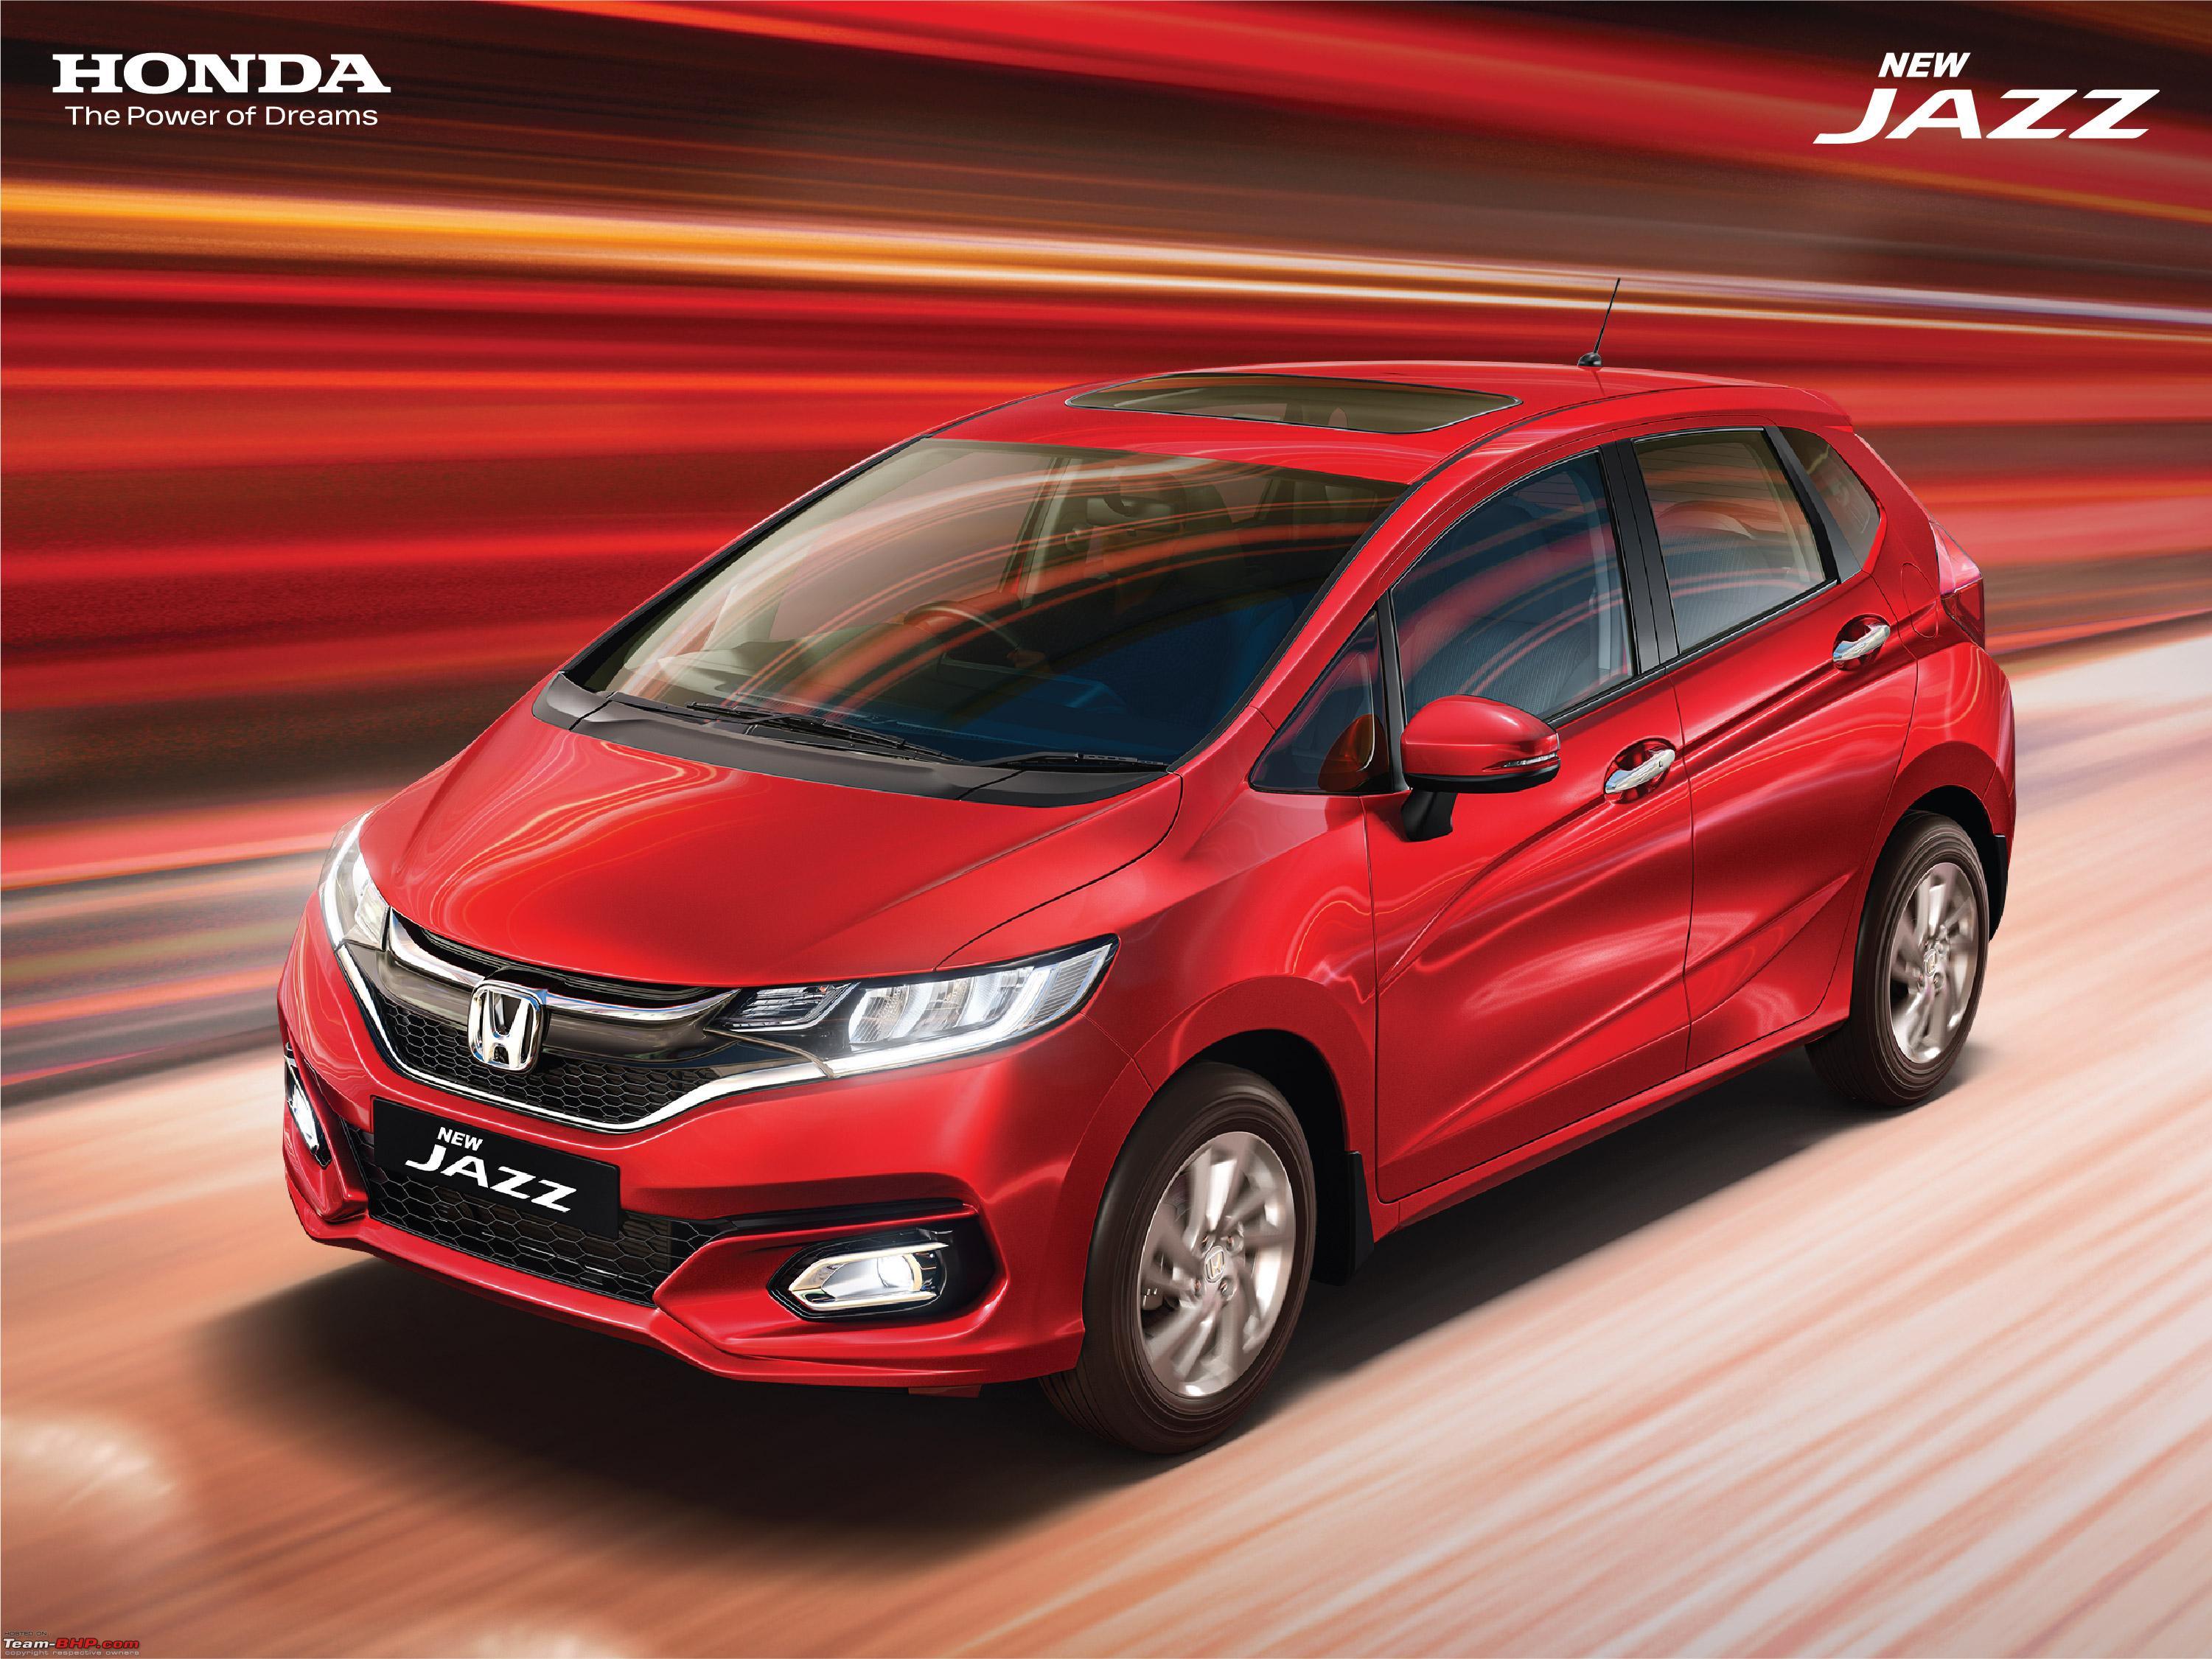 Honda Jazz BS6, now launched at Rs. 7.5 lakhs - Team-BHP